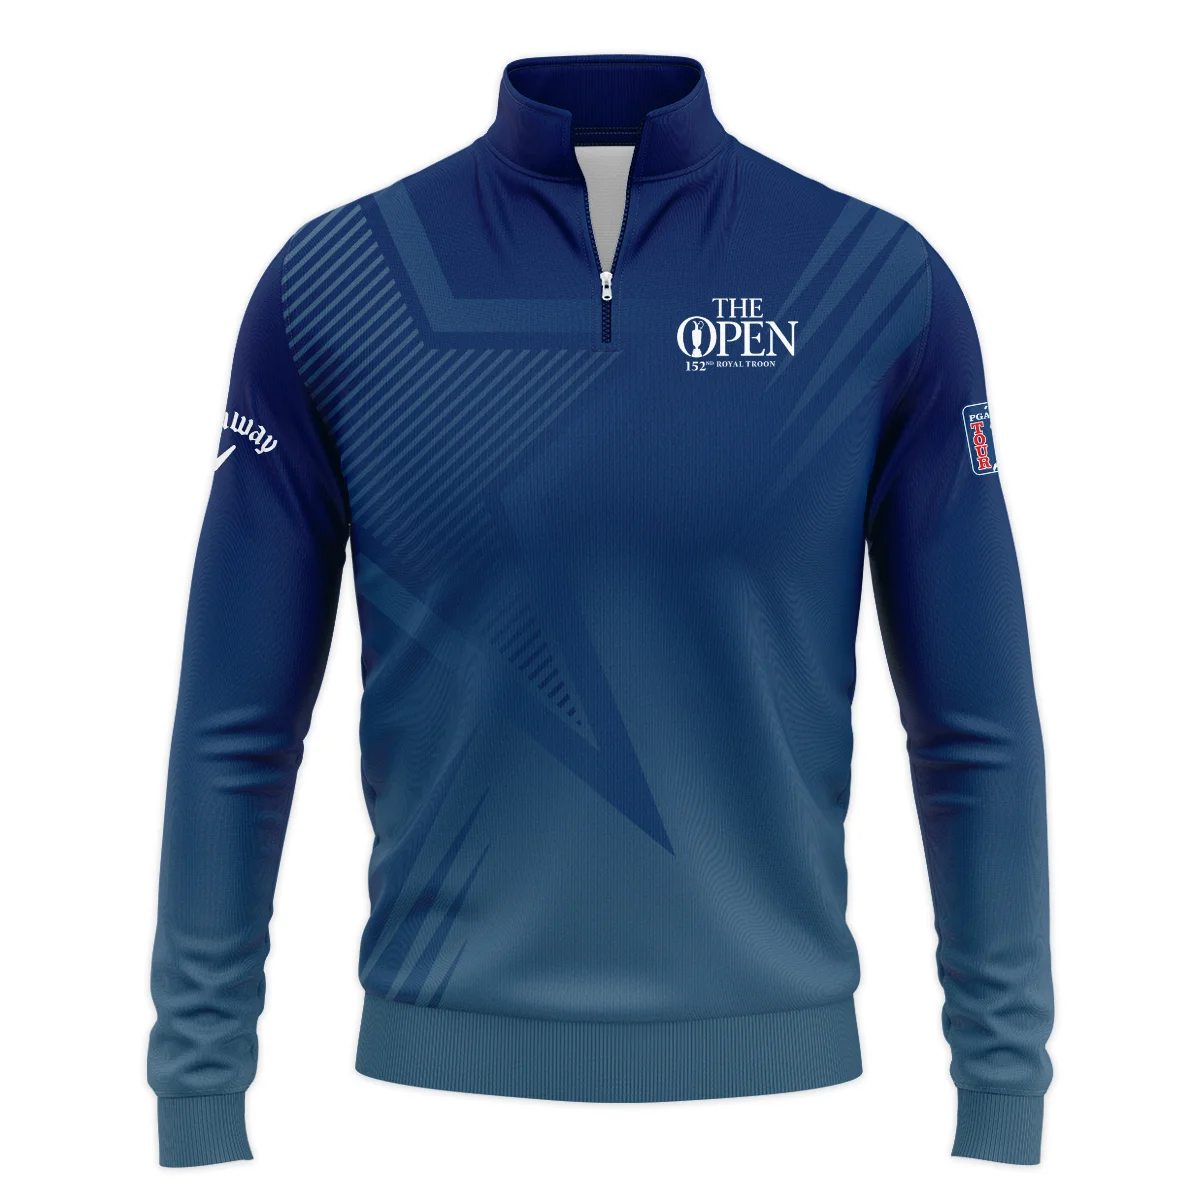 Callaway 152nd Open Championship Abstract Background Dark Blue Gradient Star Line Performance Quarter Zip Sweatshirt With Pockets All Over Prints HOTOP260624A04CLWTS